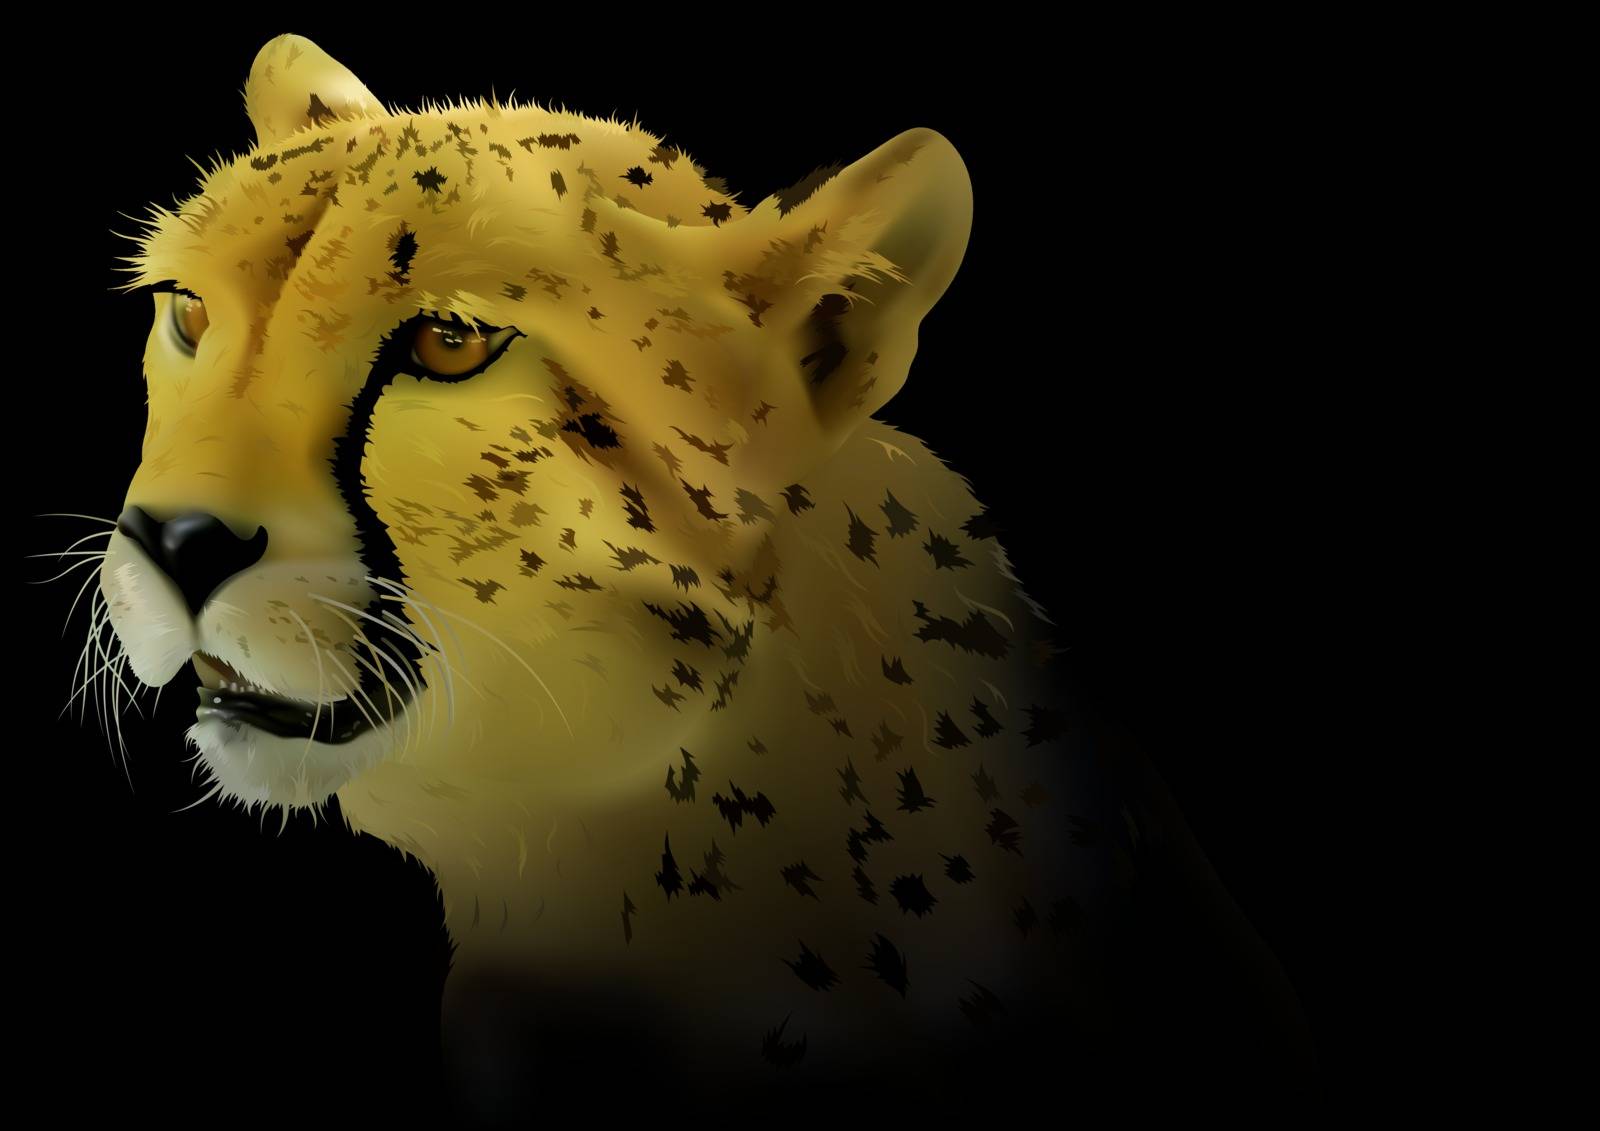 Cheetah on Black Background - Detailed and Realistic Colored Illustration, Vector